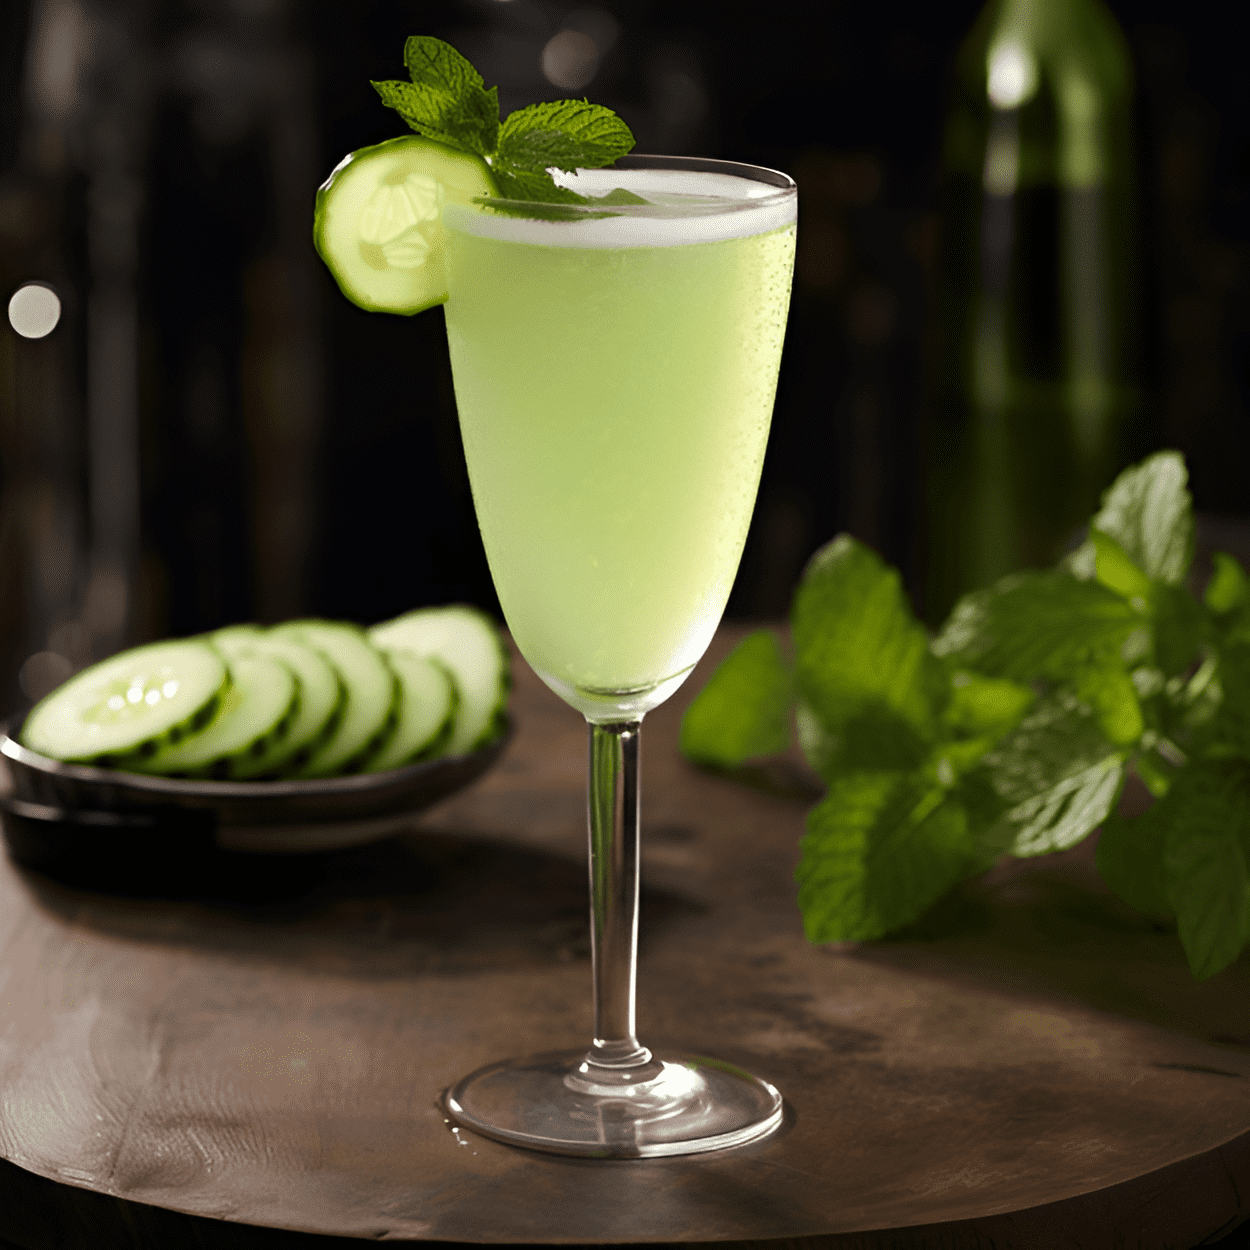 Cucumber-Mint French 75 Cocktail Recipe - The Cucumber-Mint French 75 is a delightfully refreshing cocktail with a light, crisp taste. The cucumber and mint provide a fresh, botanical flavor, while the gin adds a subtle juniper note. The lemon juice and champagne bring a bright, citrusy acidity, and the simple syrup balances everything out with a touch of sweetness.